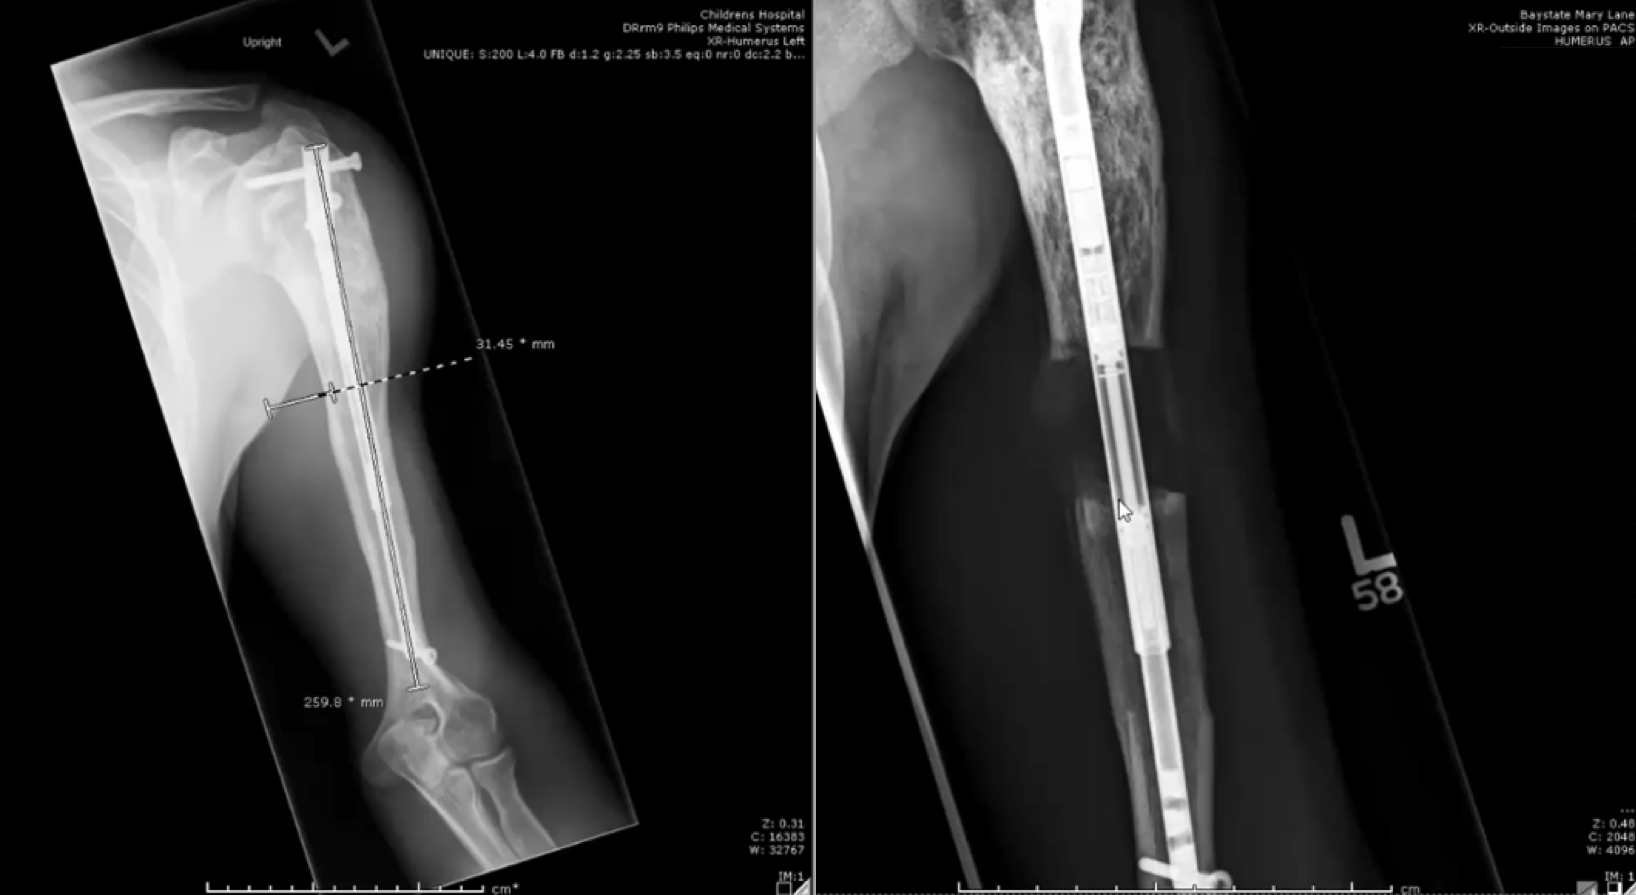 Two x-ray images of a patient’s left arm at two stages of arm lengthening. In the first, a lengthening rod has been surgically attached to the bone in the upper arm. In the second, the bone has been cut and there is a space between the ends of bone that the rod is supporting. New bone growth is visible in this space.